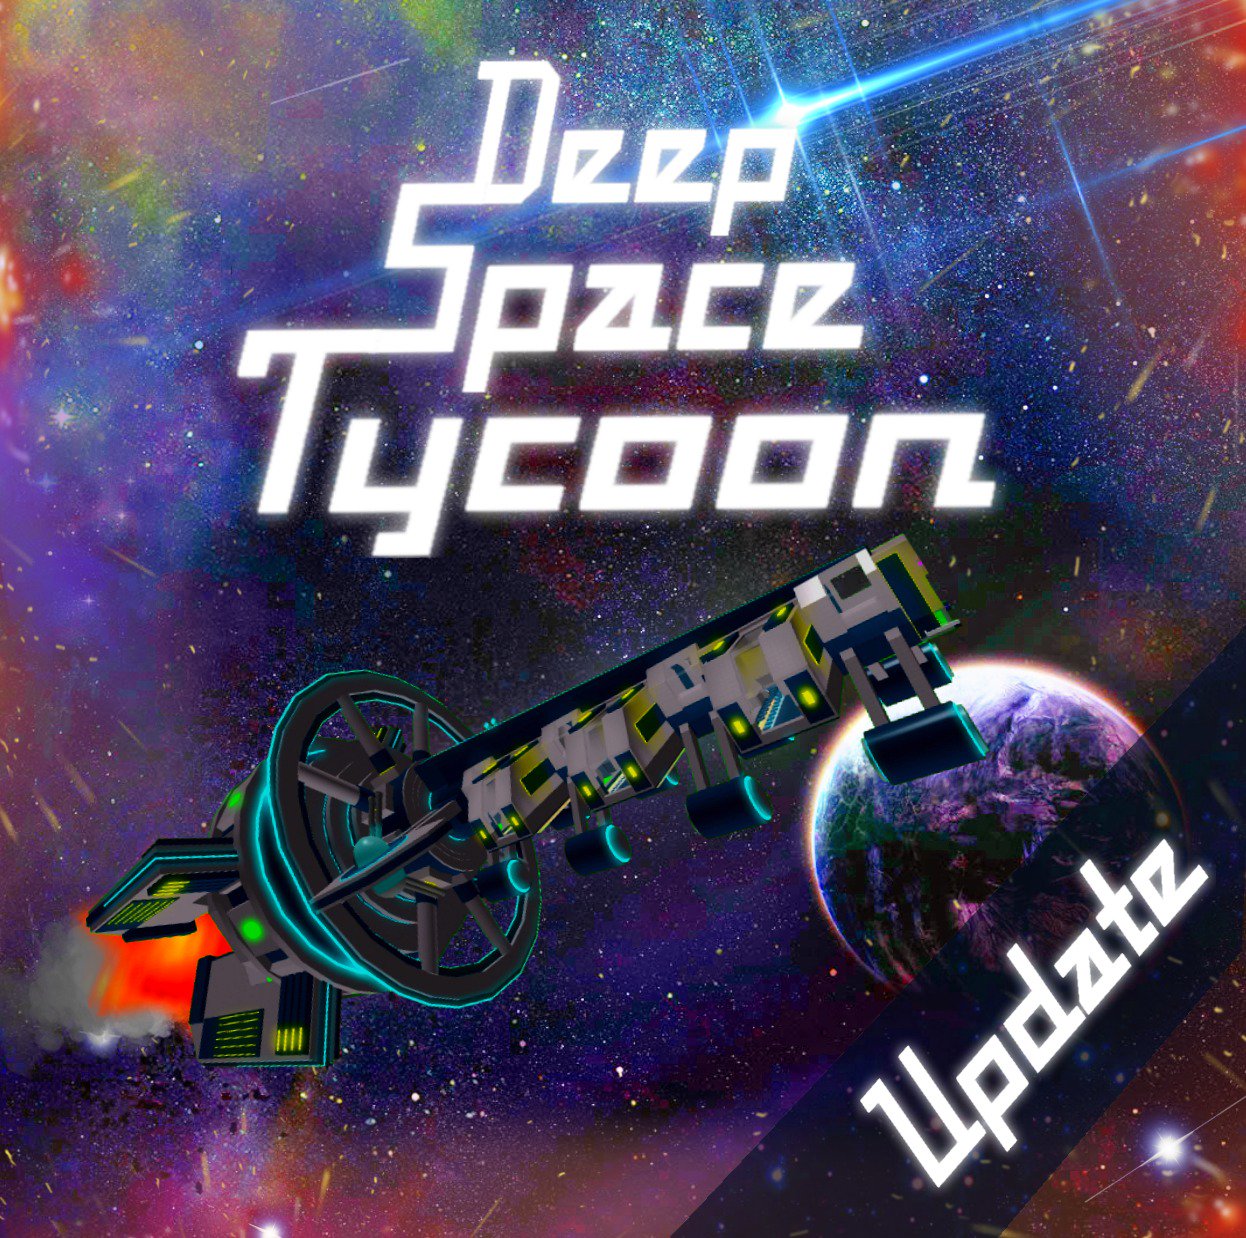 Biggranny000 On Twitter Deep Space Tycoon S New Thumbnail Credit To Clearlyrach For Most Of It And Then I Put In Minor Edits P - deep space tycoon saving roblox roblox games deep